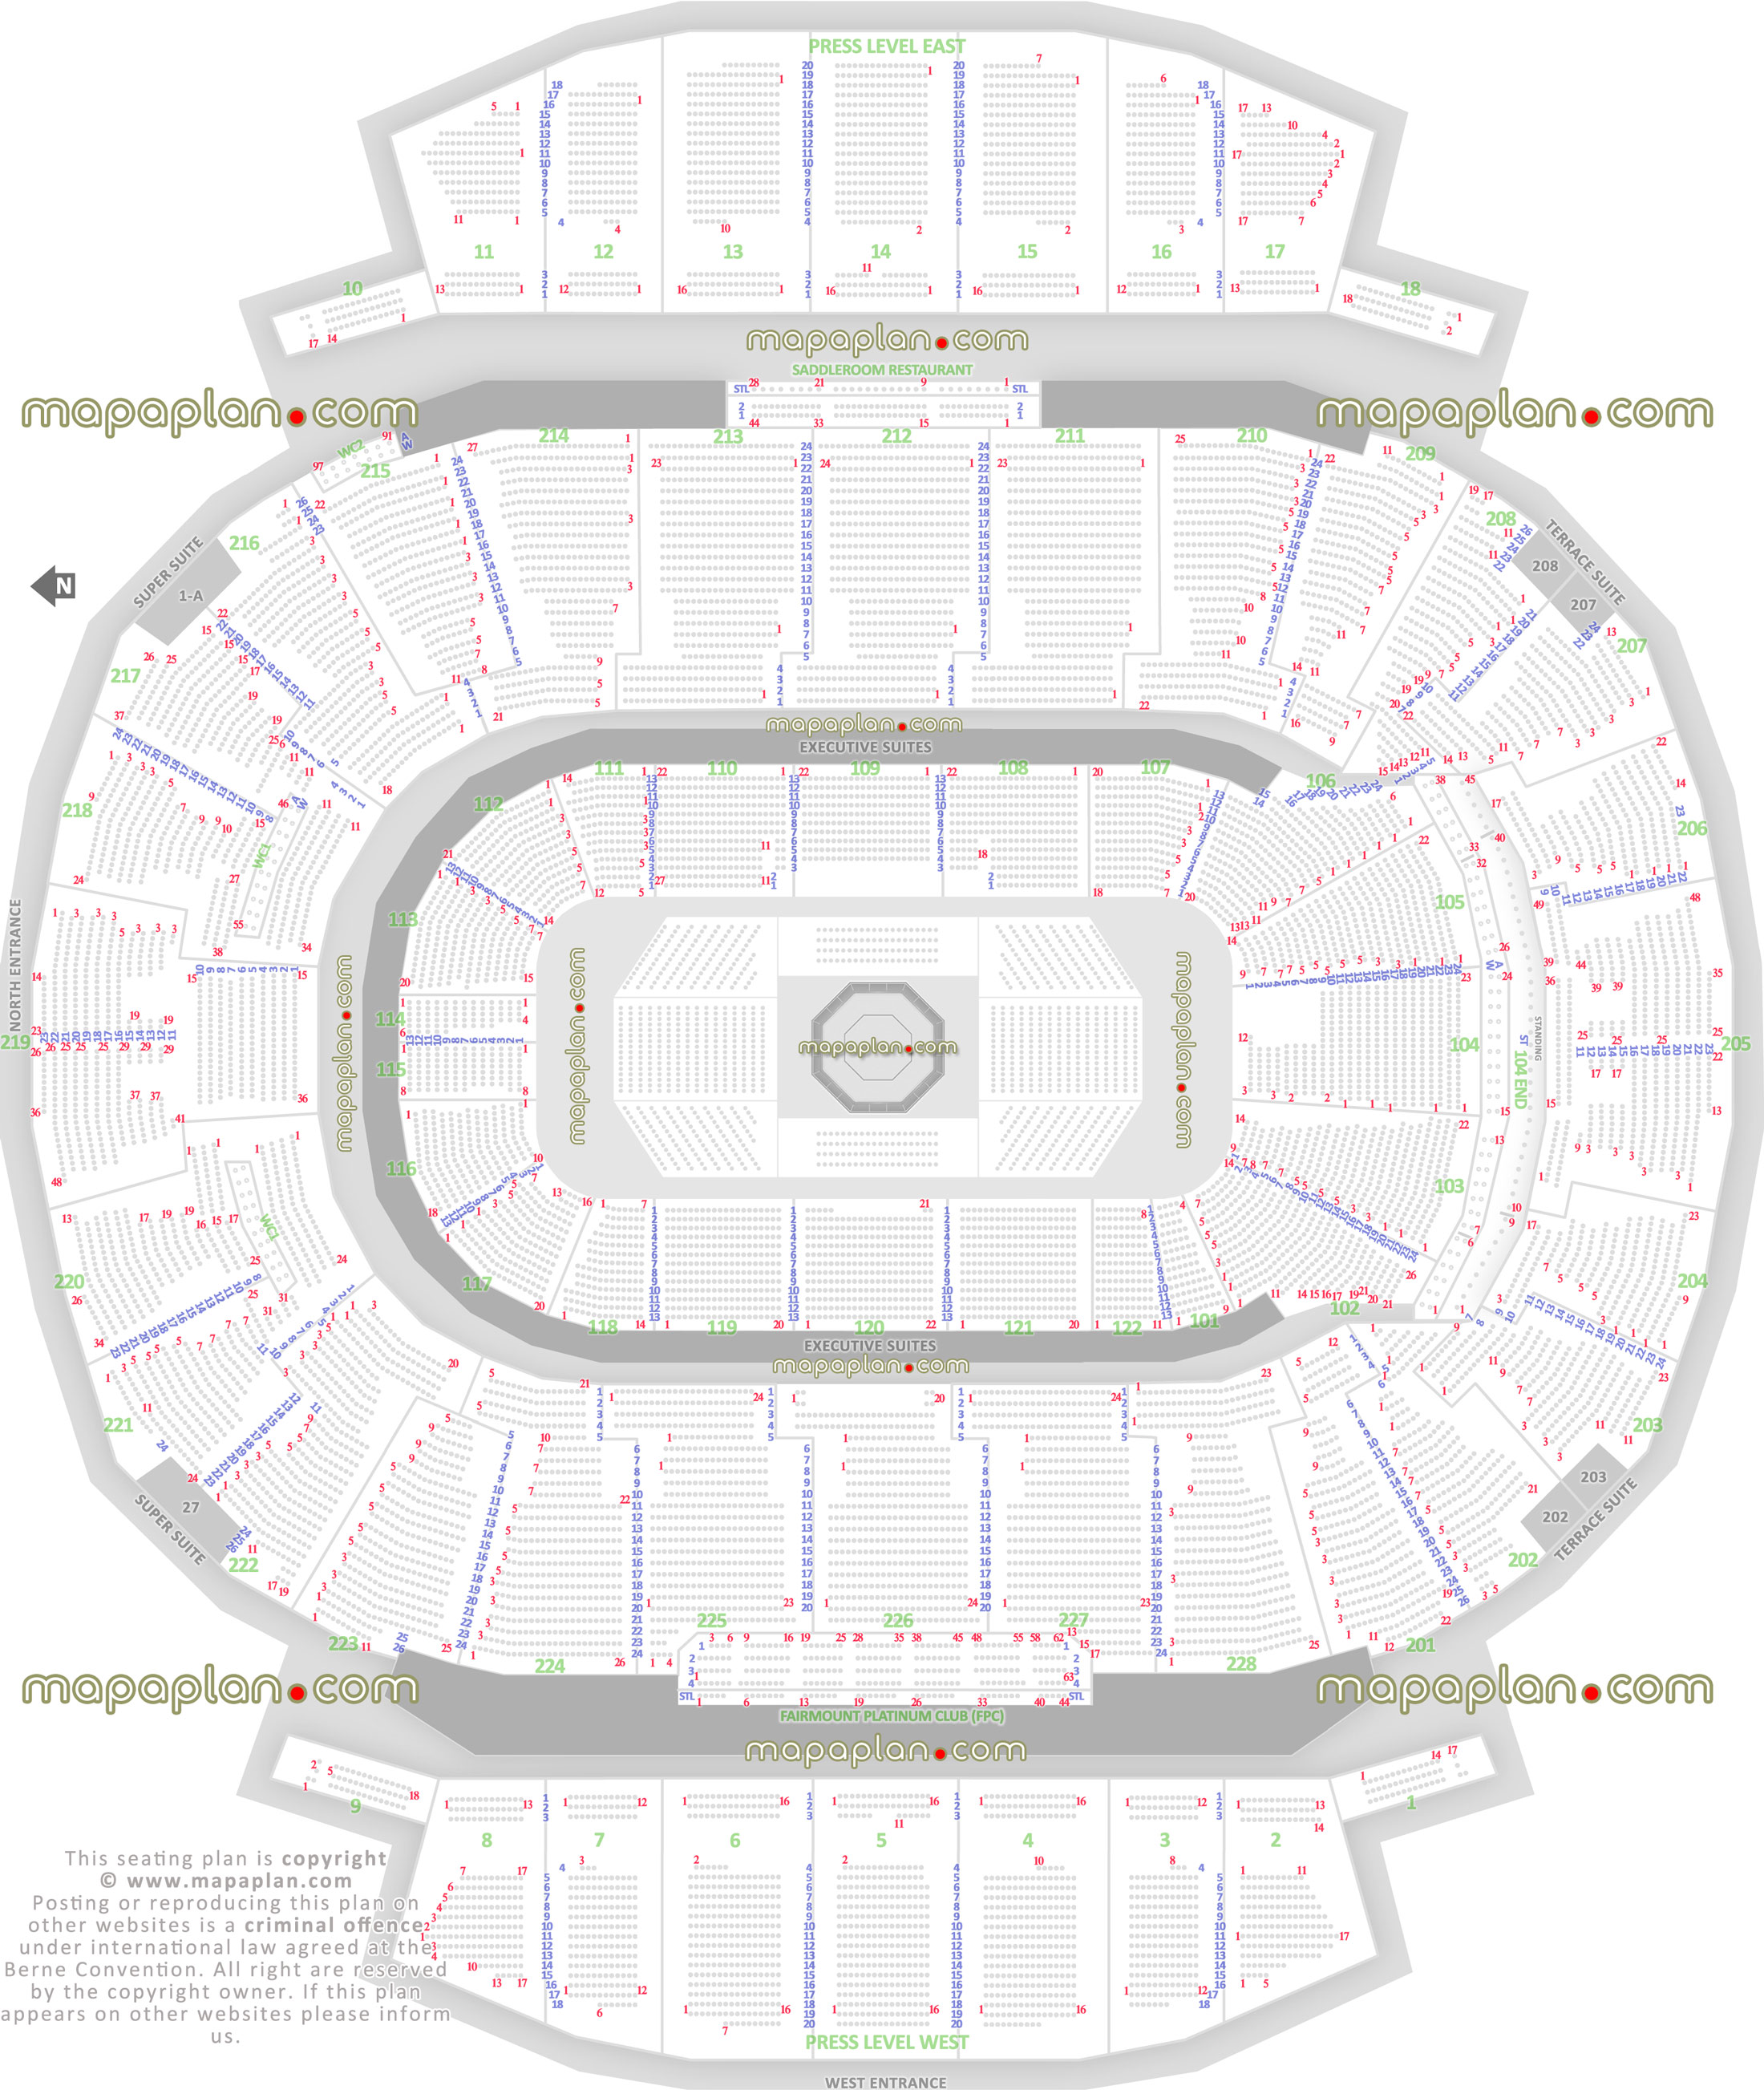 ufc mma fights calgary alberta canada printable virtual layout 360 degree arrangement interactive diagram handicapped accessible seats seats row lower platinum club press level sections seats 101 102 103 104 105 106 107 108 109 110 111 112 113 114 115 116 117 118 119 120 121 122 Calgary Scotiabank Saddledome seating chart